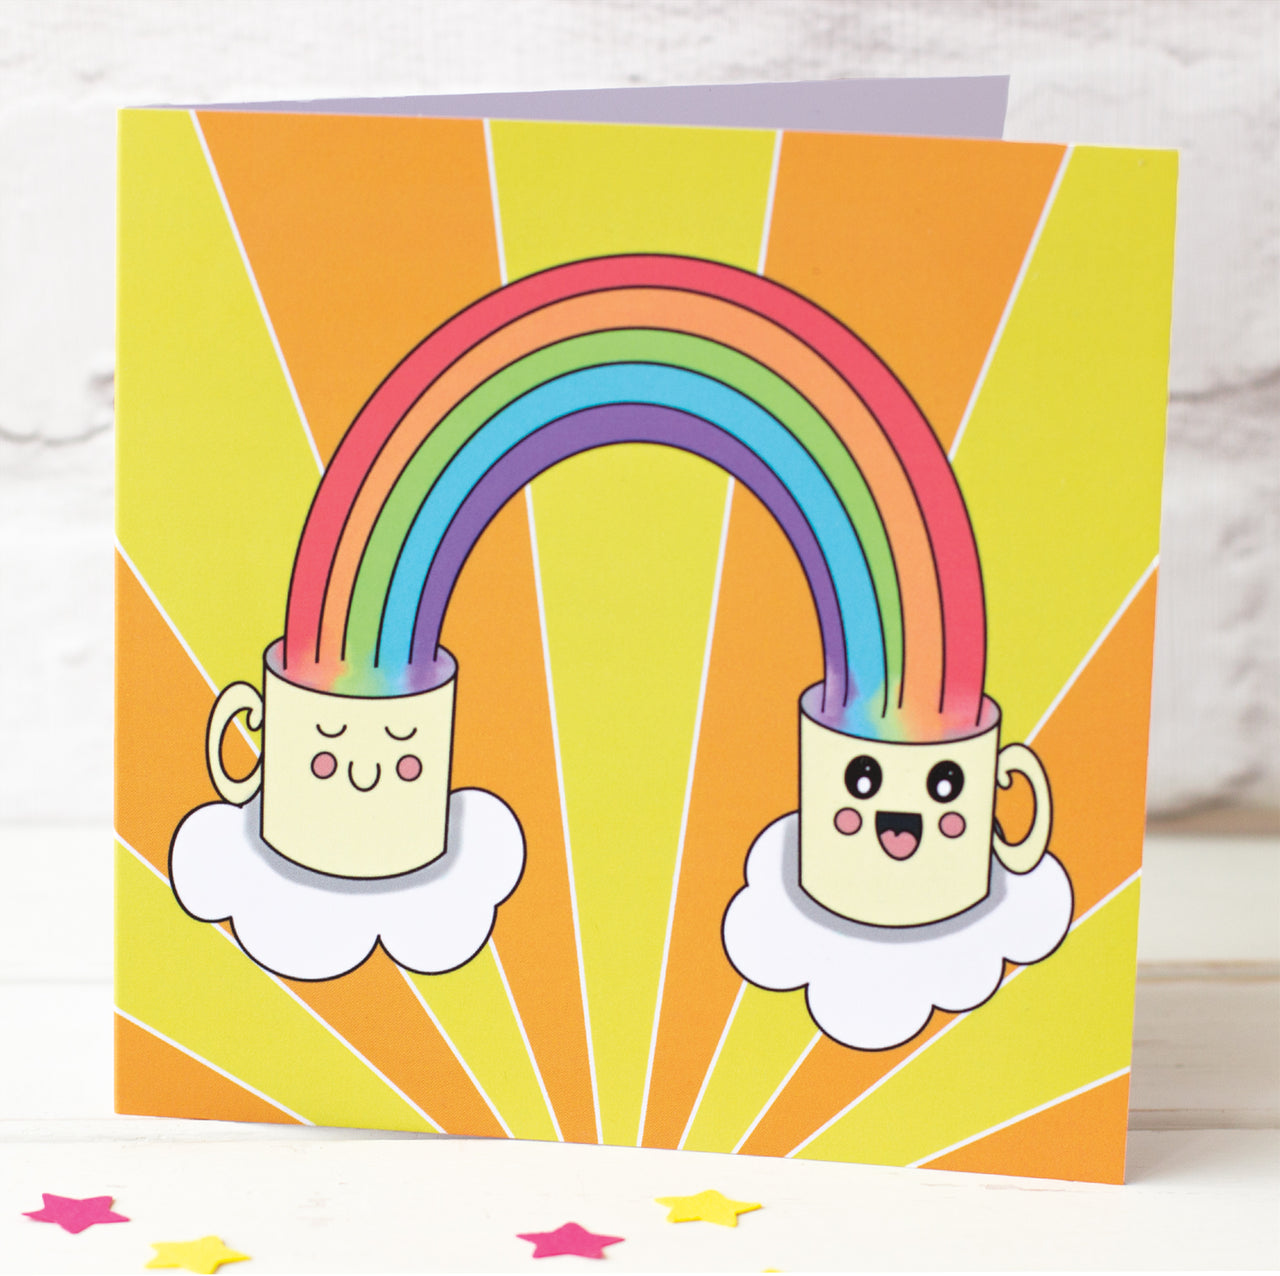 Send a Smile. Happy, Cute Mugs and Rainbows Greeting Card.